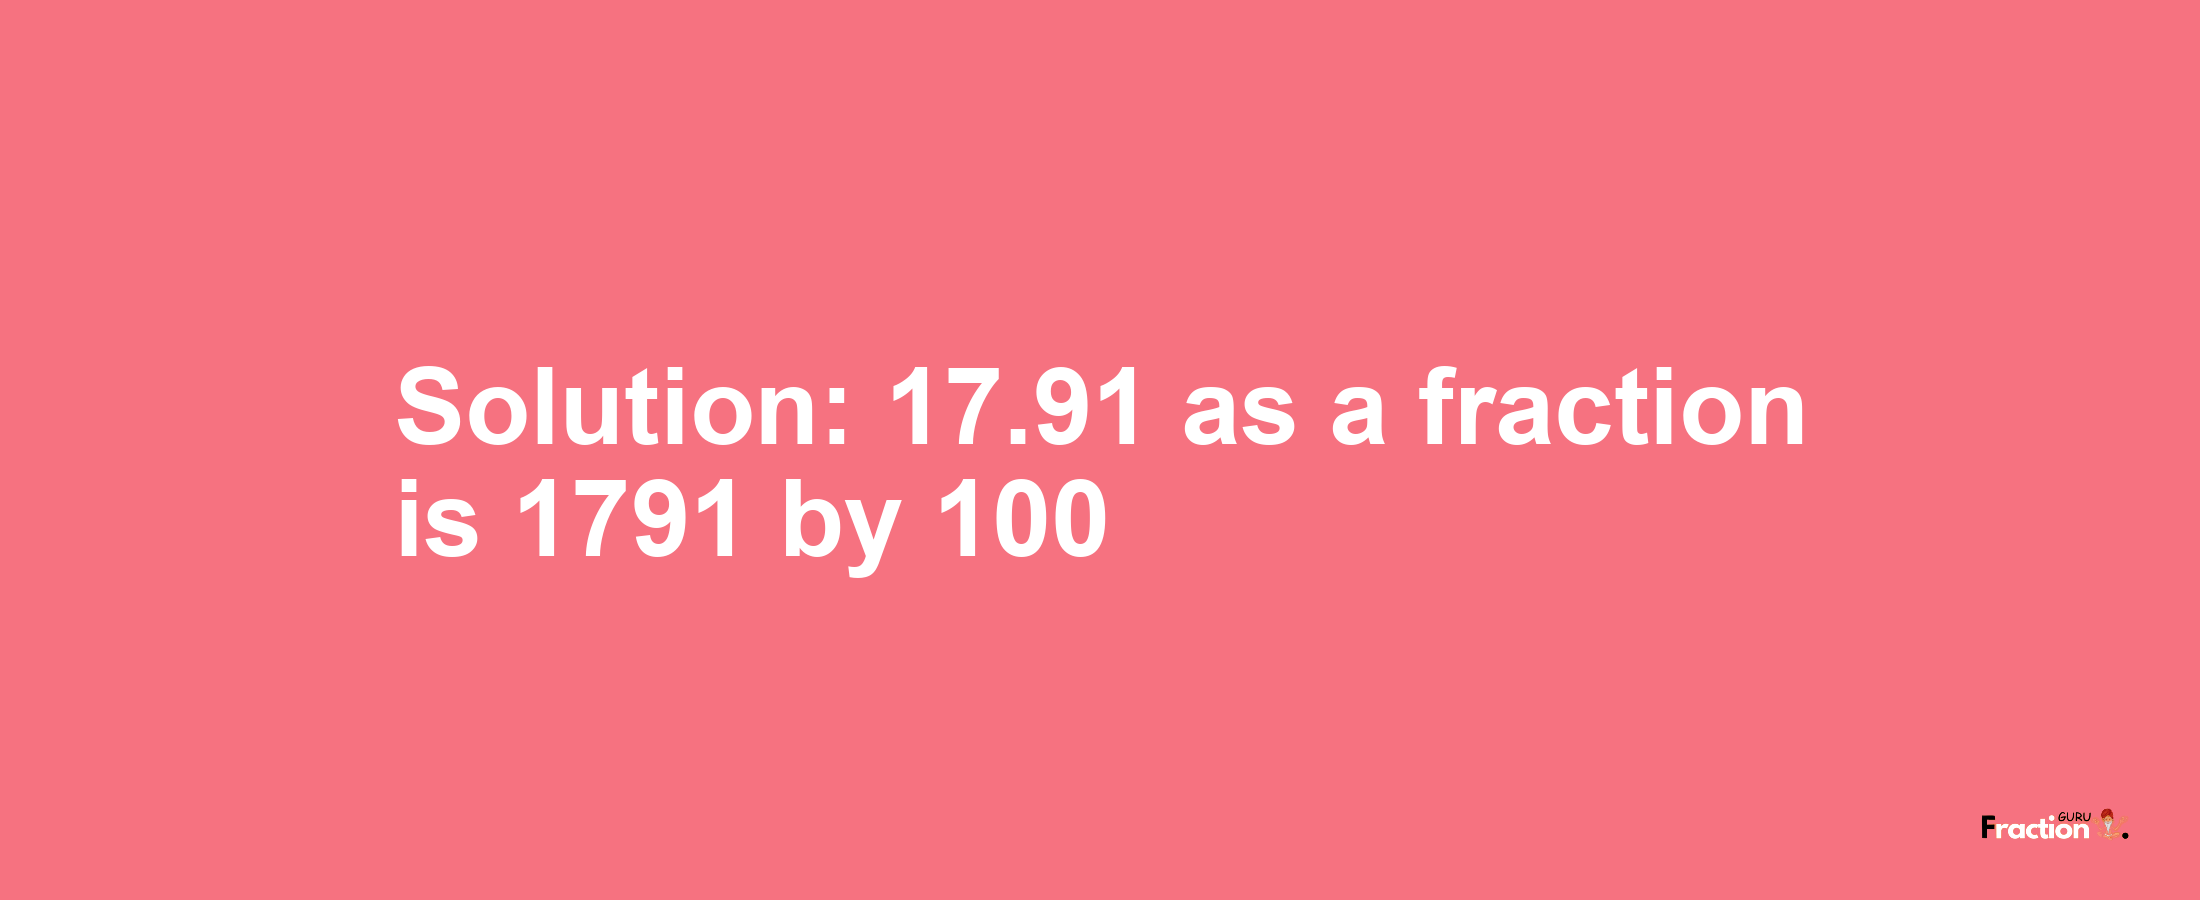 Solution:17.91 as a fraction is 1791/100